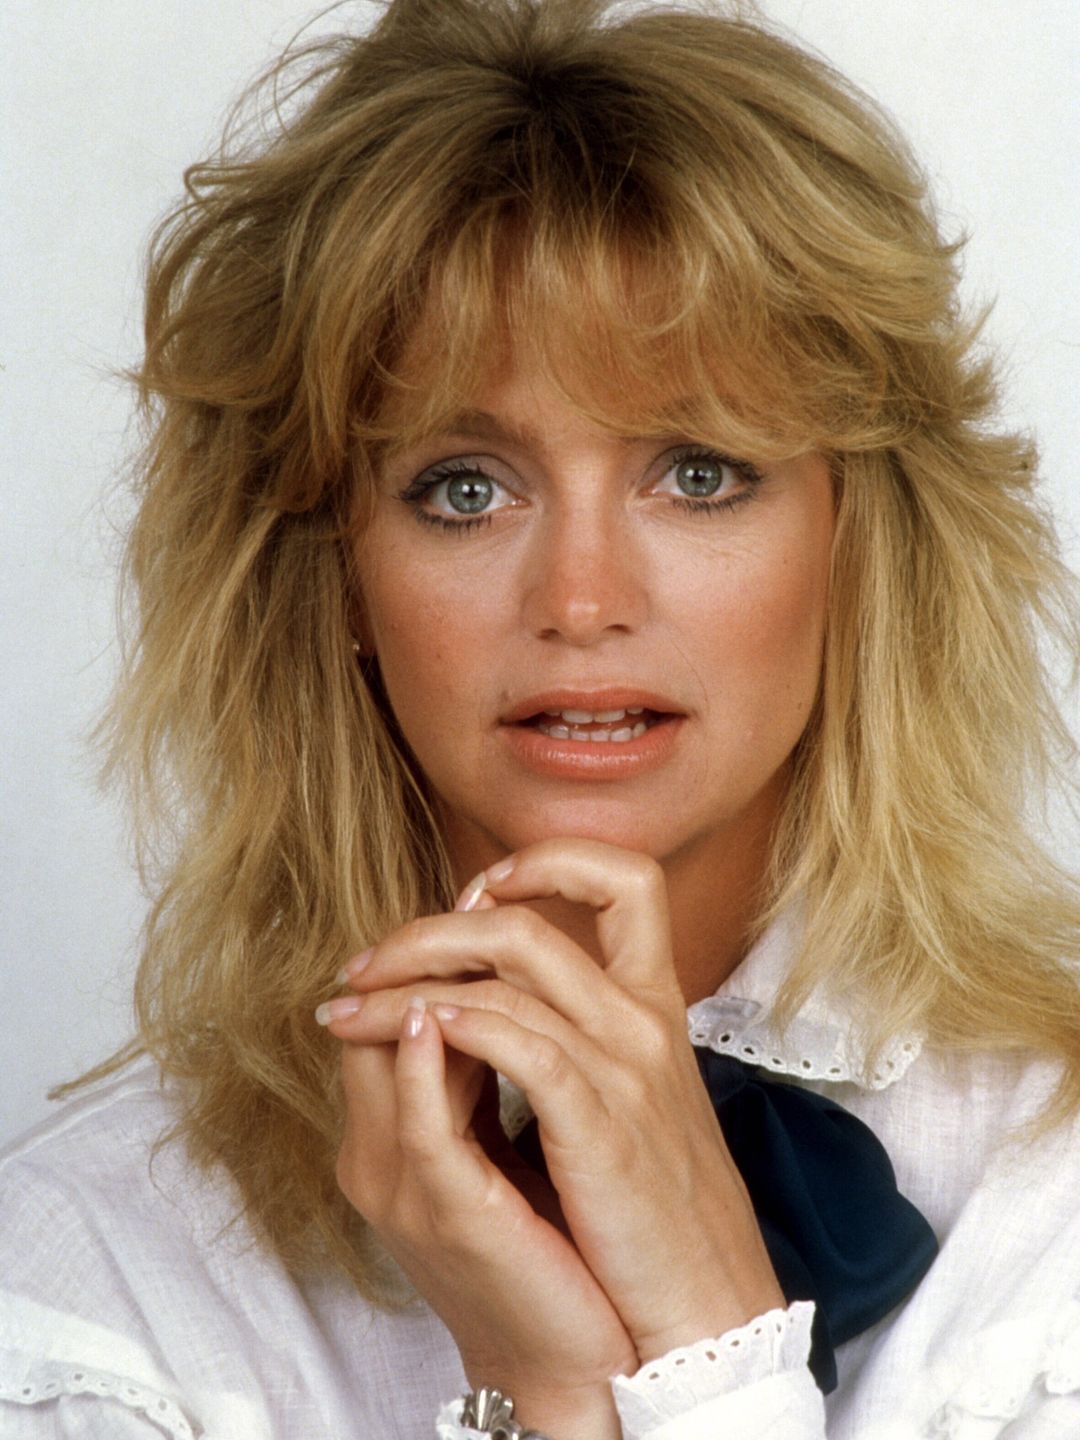 Goldie Hawn who is her mother